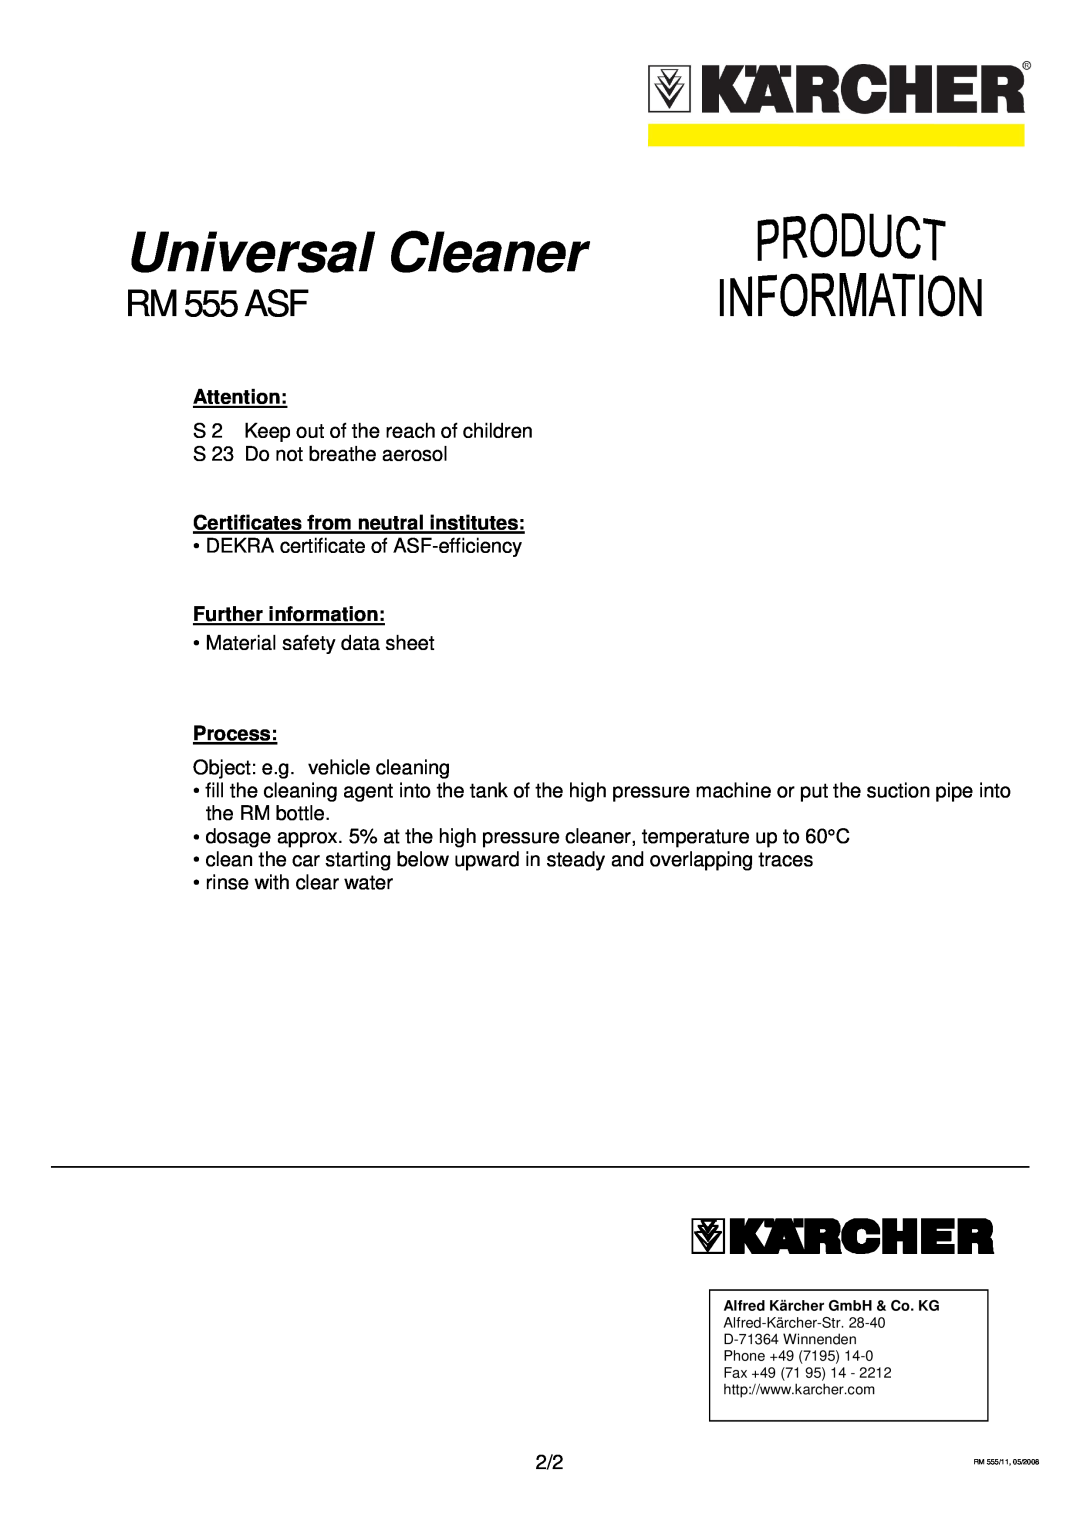 Karcher RM 555 ASF manual Certificates from neutral institutes, Further information, Process, Universal Cleaner 